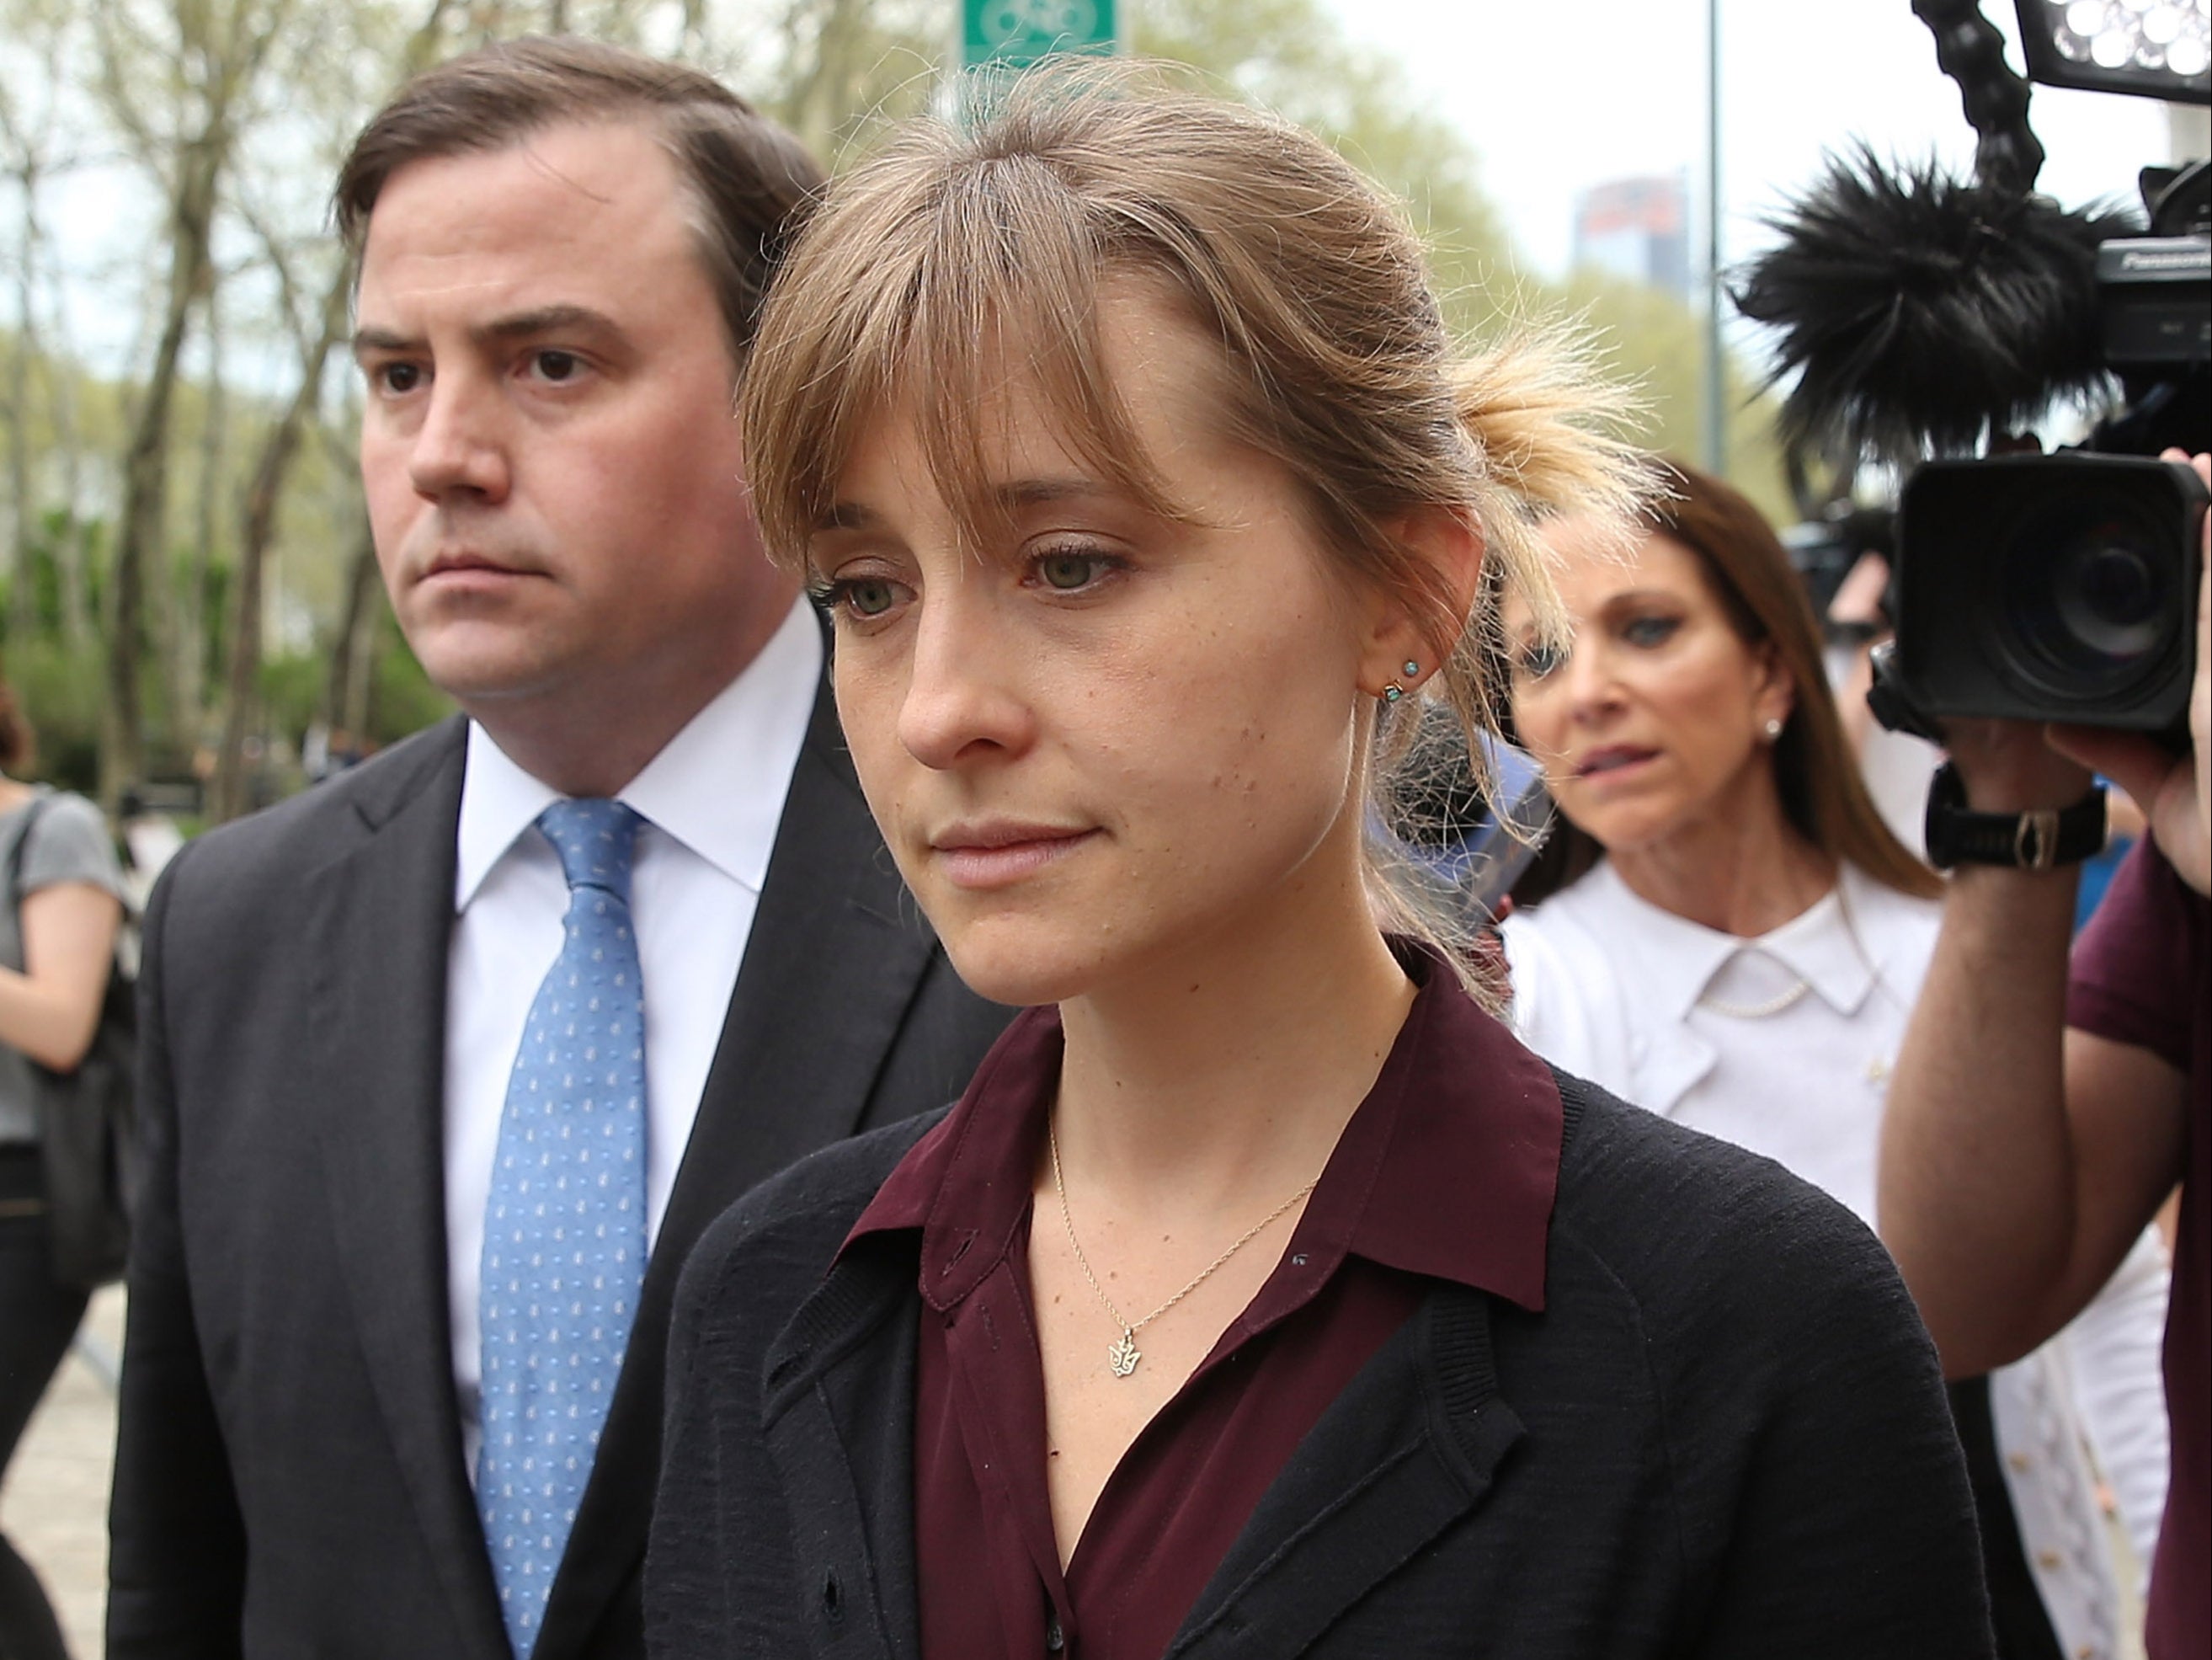 Allison Mack How Smallville star came to be embroiled in criminal sex cult NXIVM The Independent